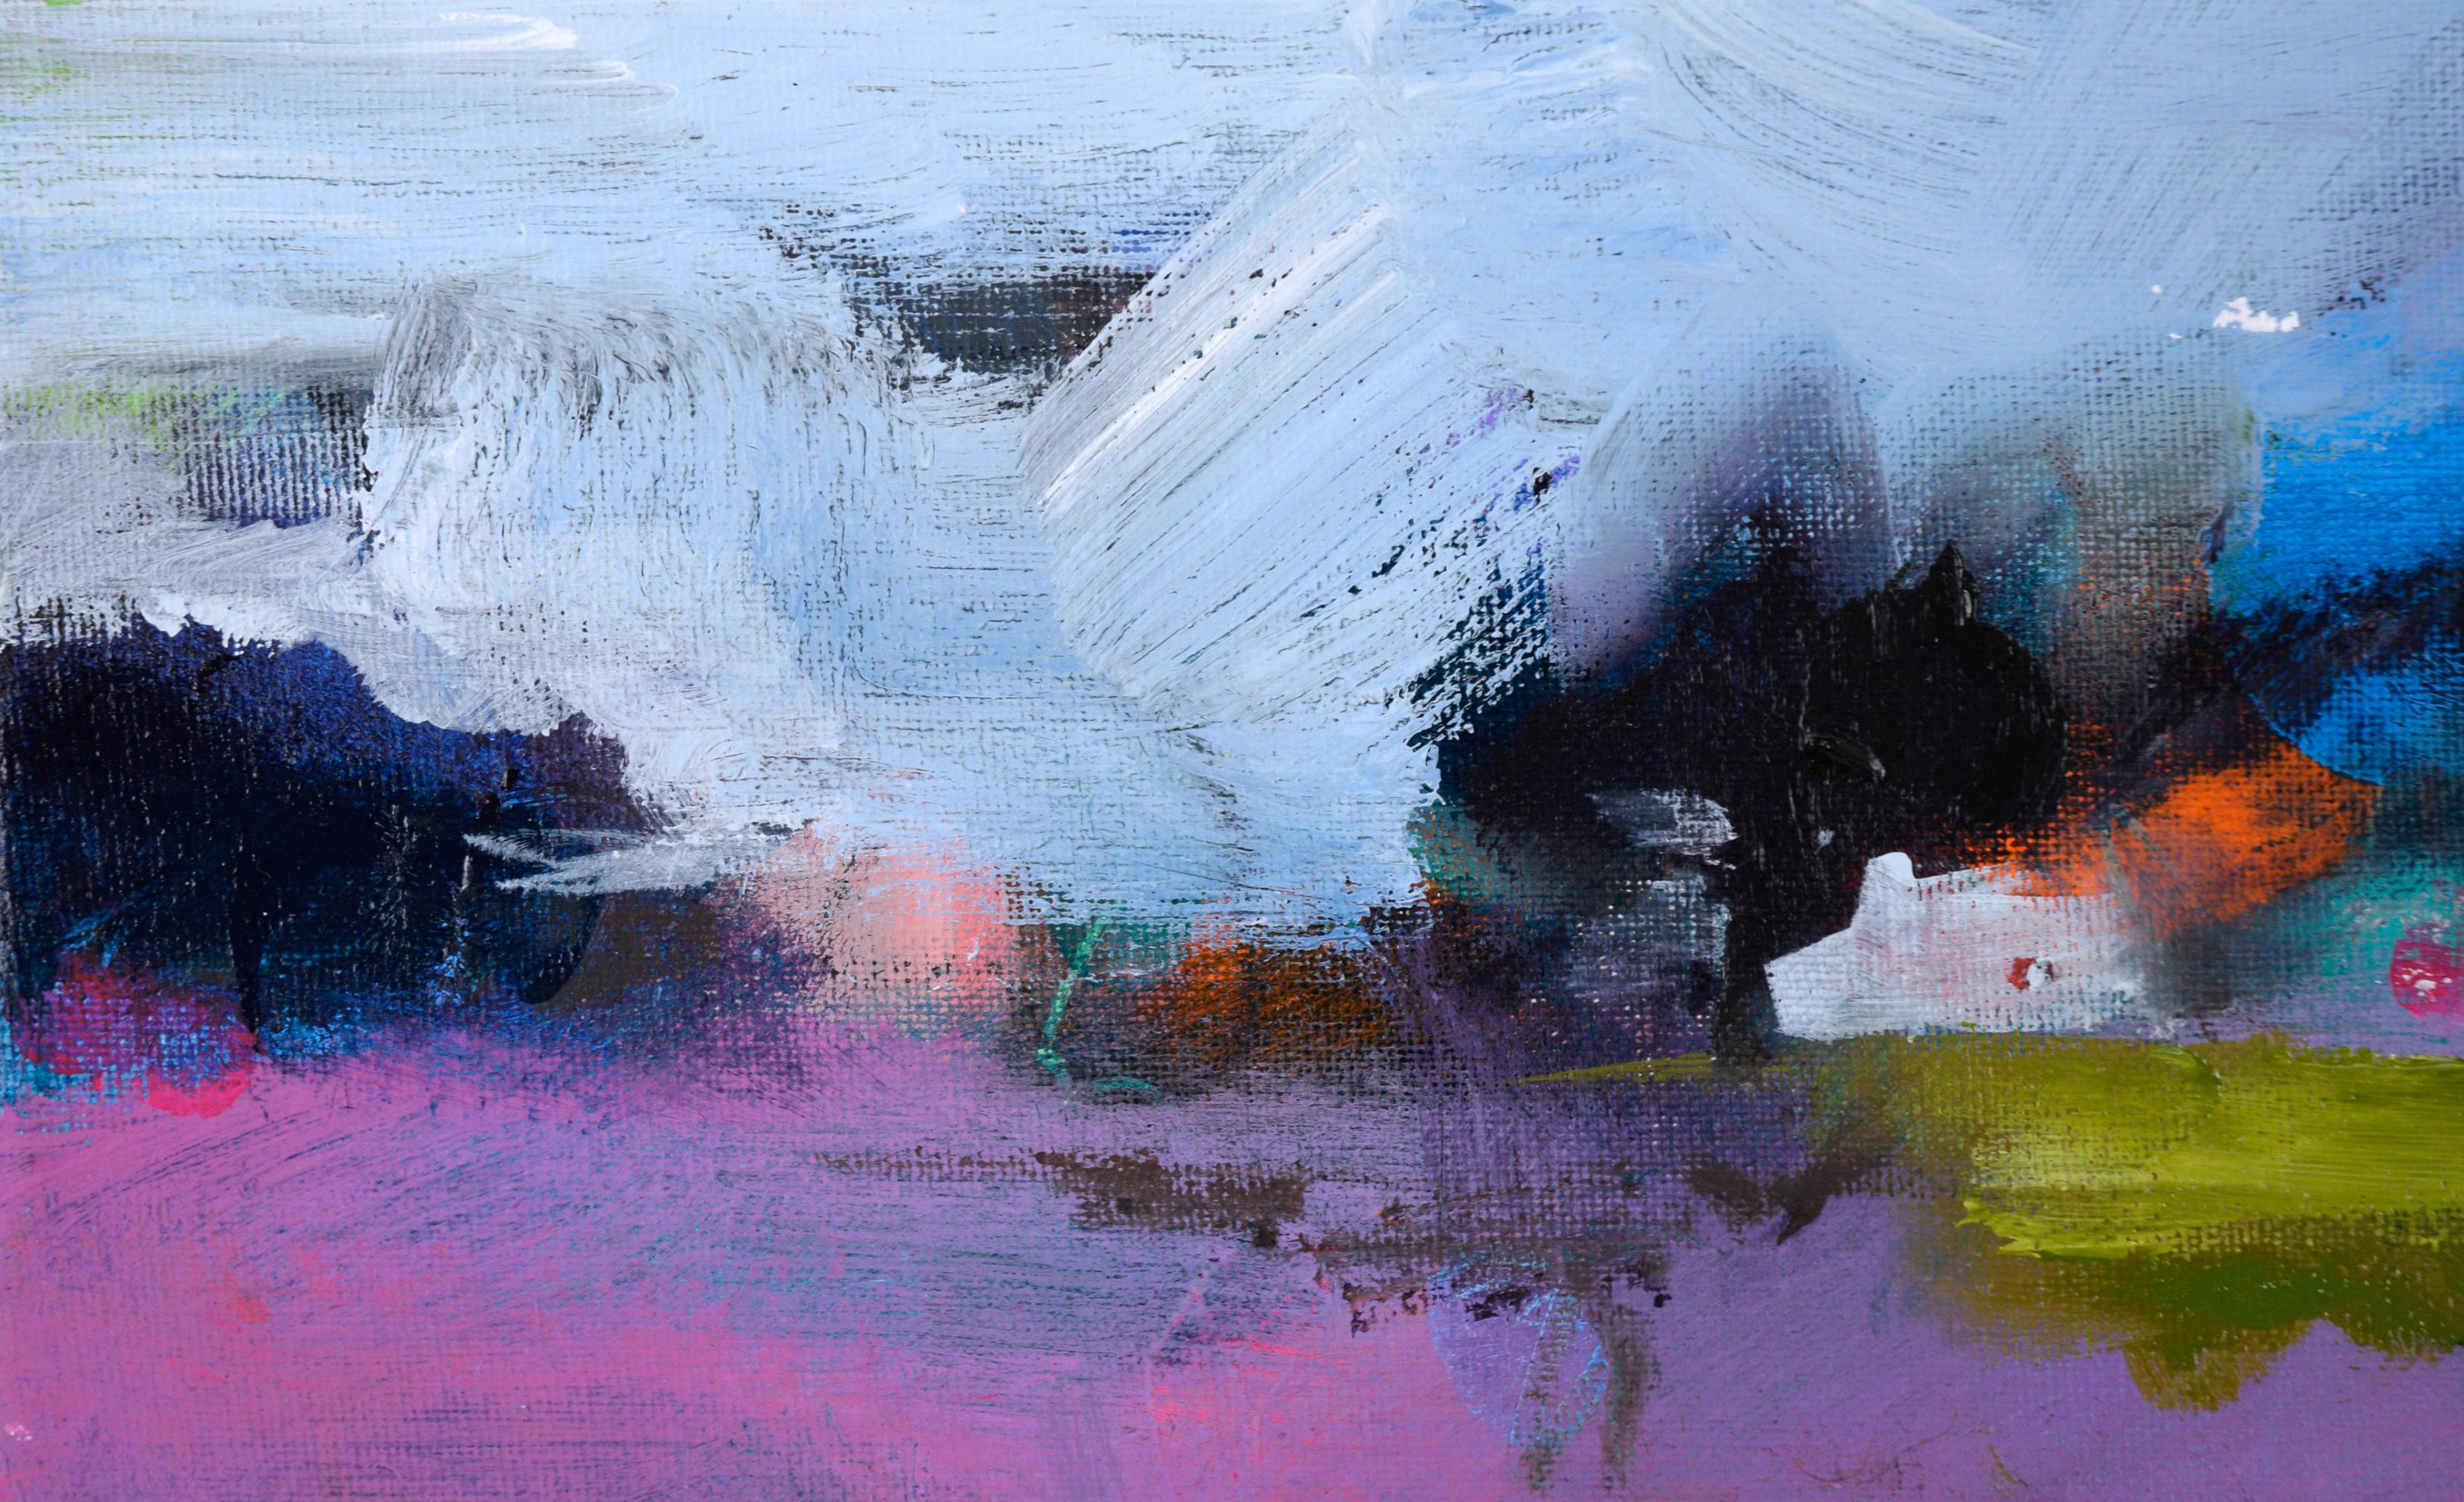 Lavender Field - Abstracted Landscape in Acrylic on Canvas - Painting by Ilana Ingber